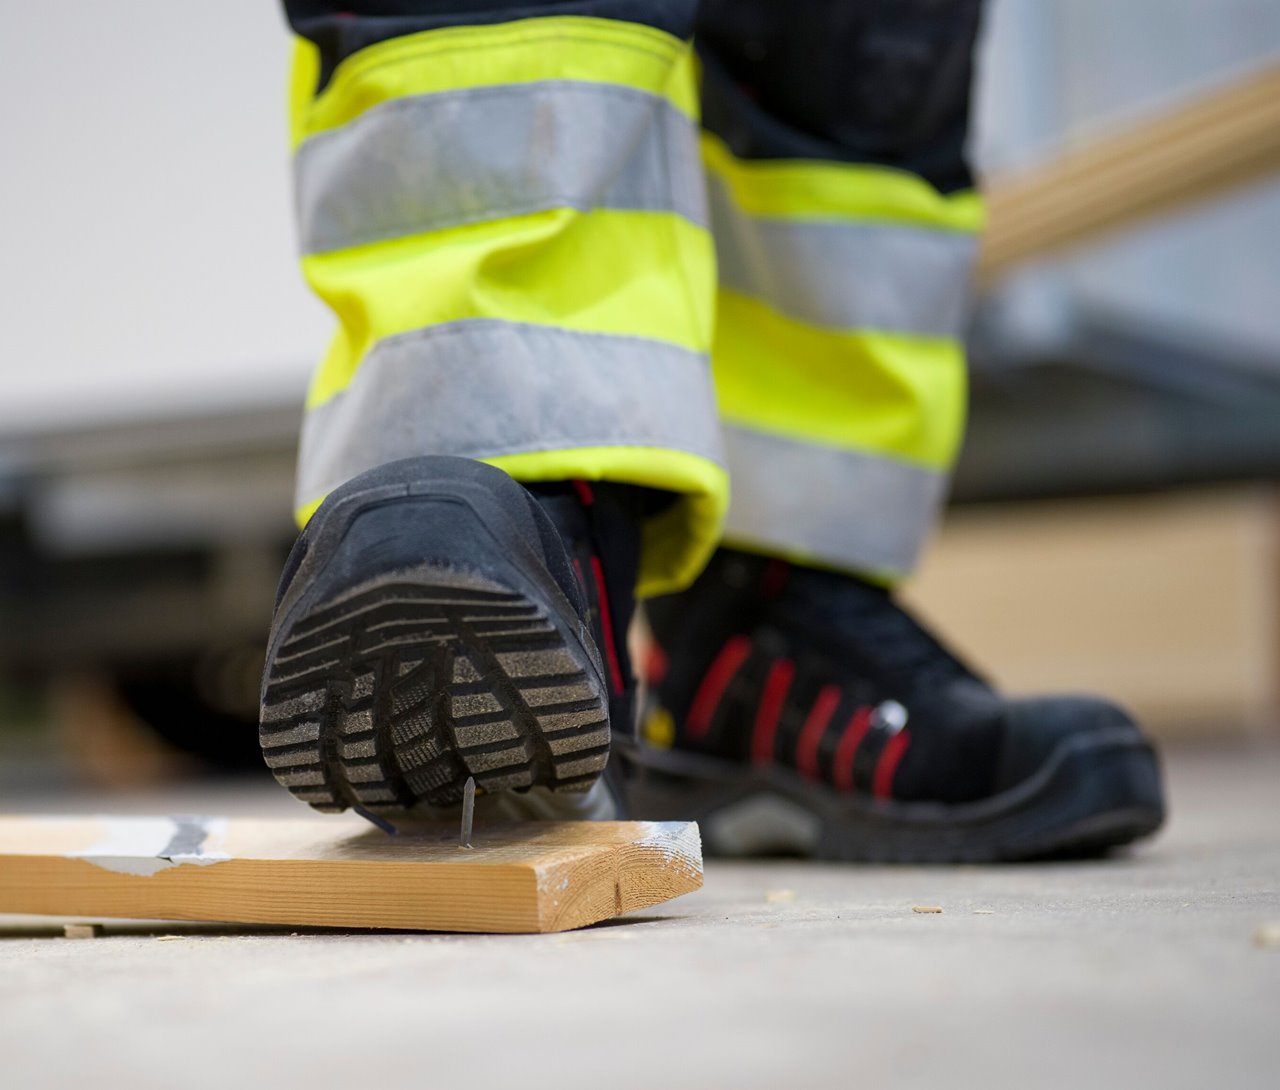 Your Guide to JALAS Safety Shoes S1, S2, and S3